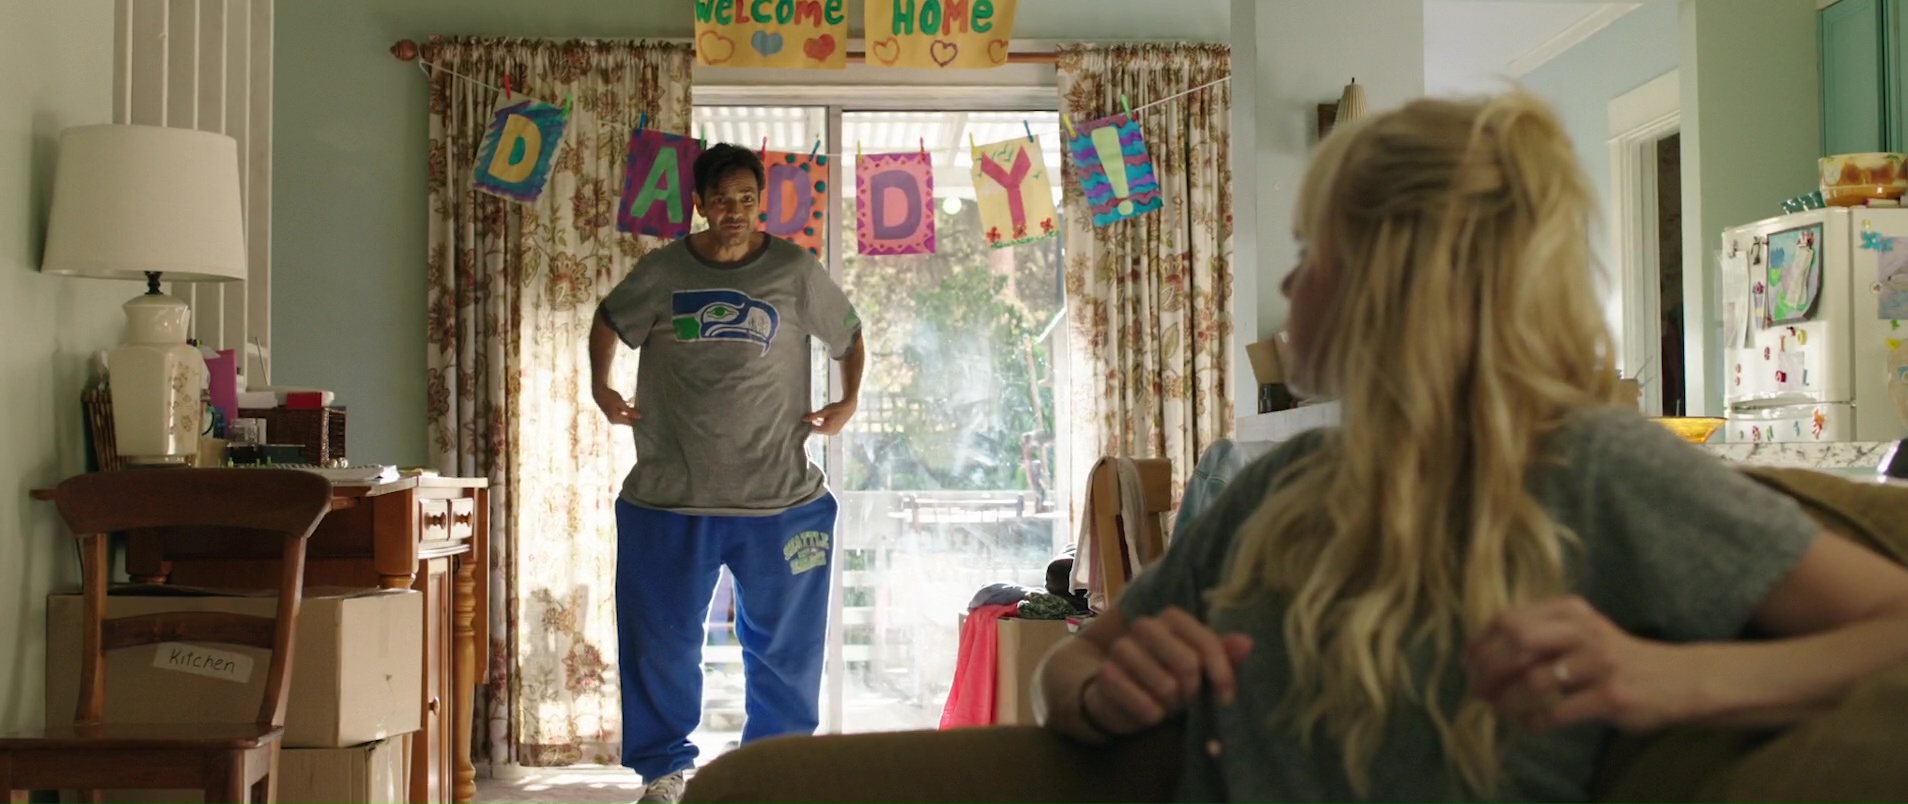 ...Seattle Seahawks T-Shirt and Blue Pants Worn by Eugenio Derbez in Overbo...